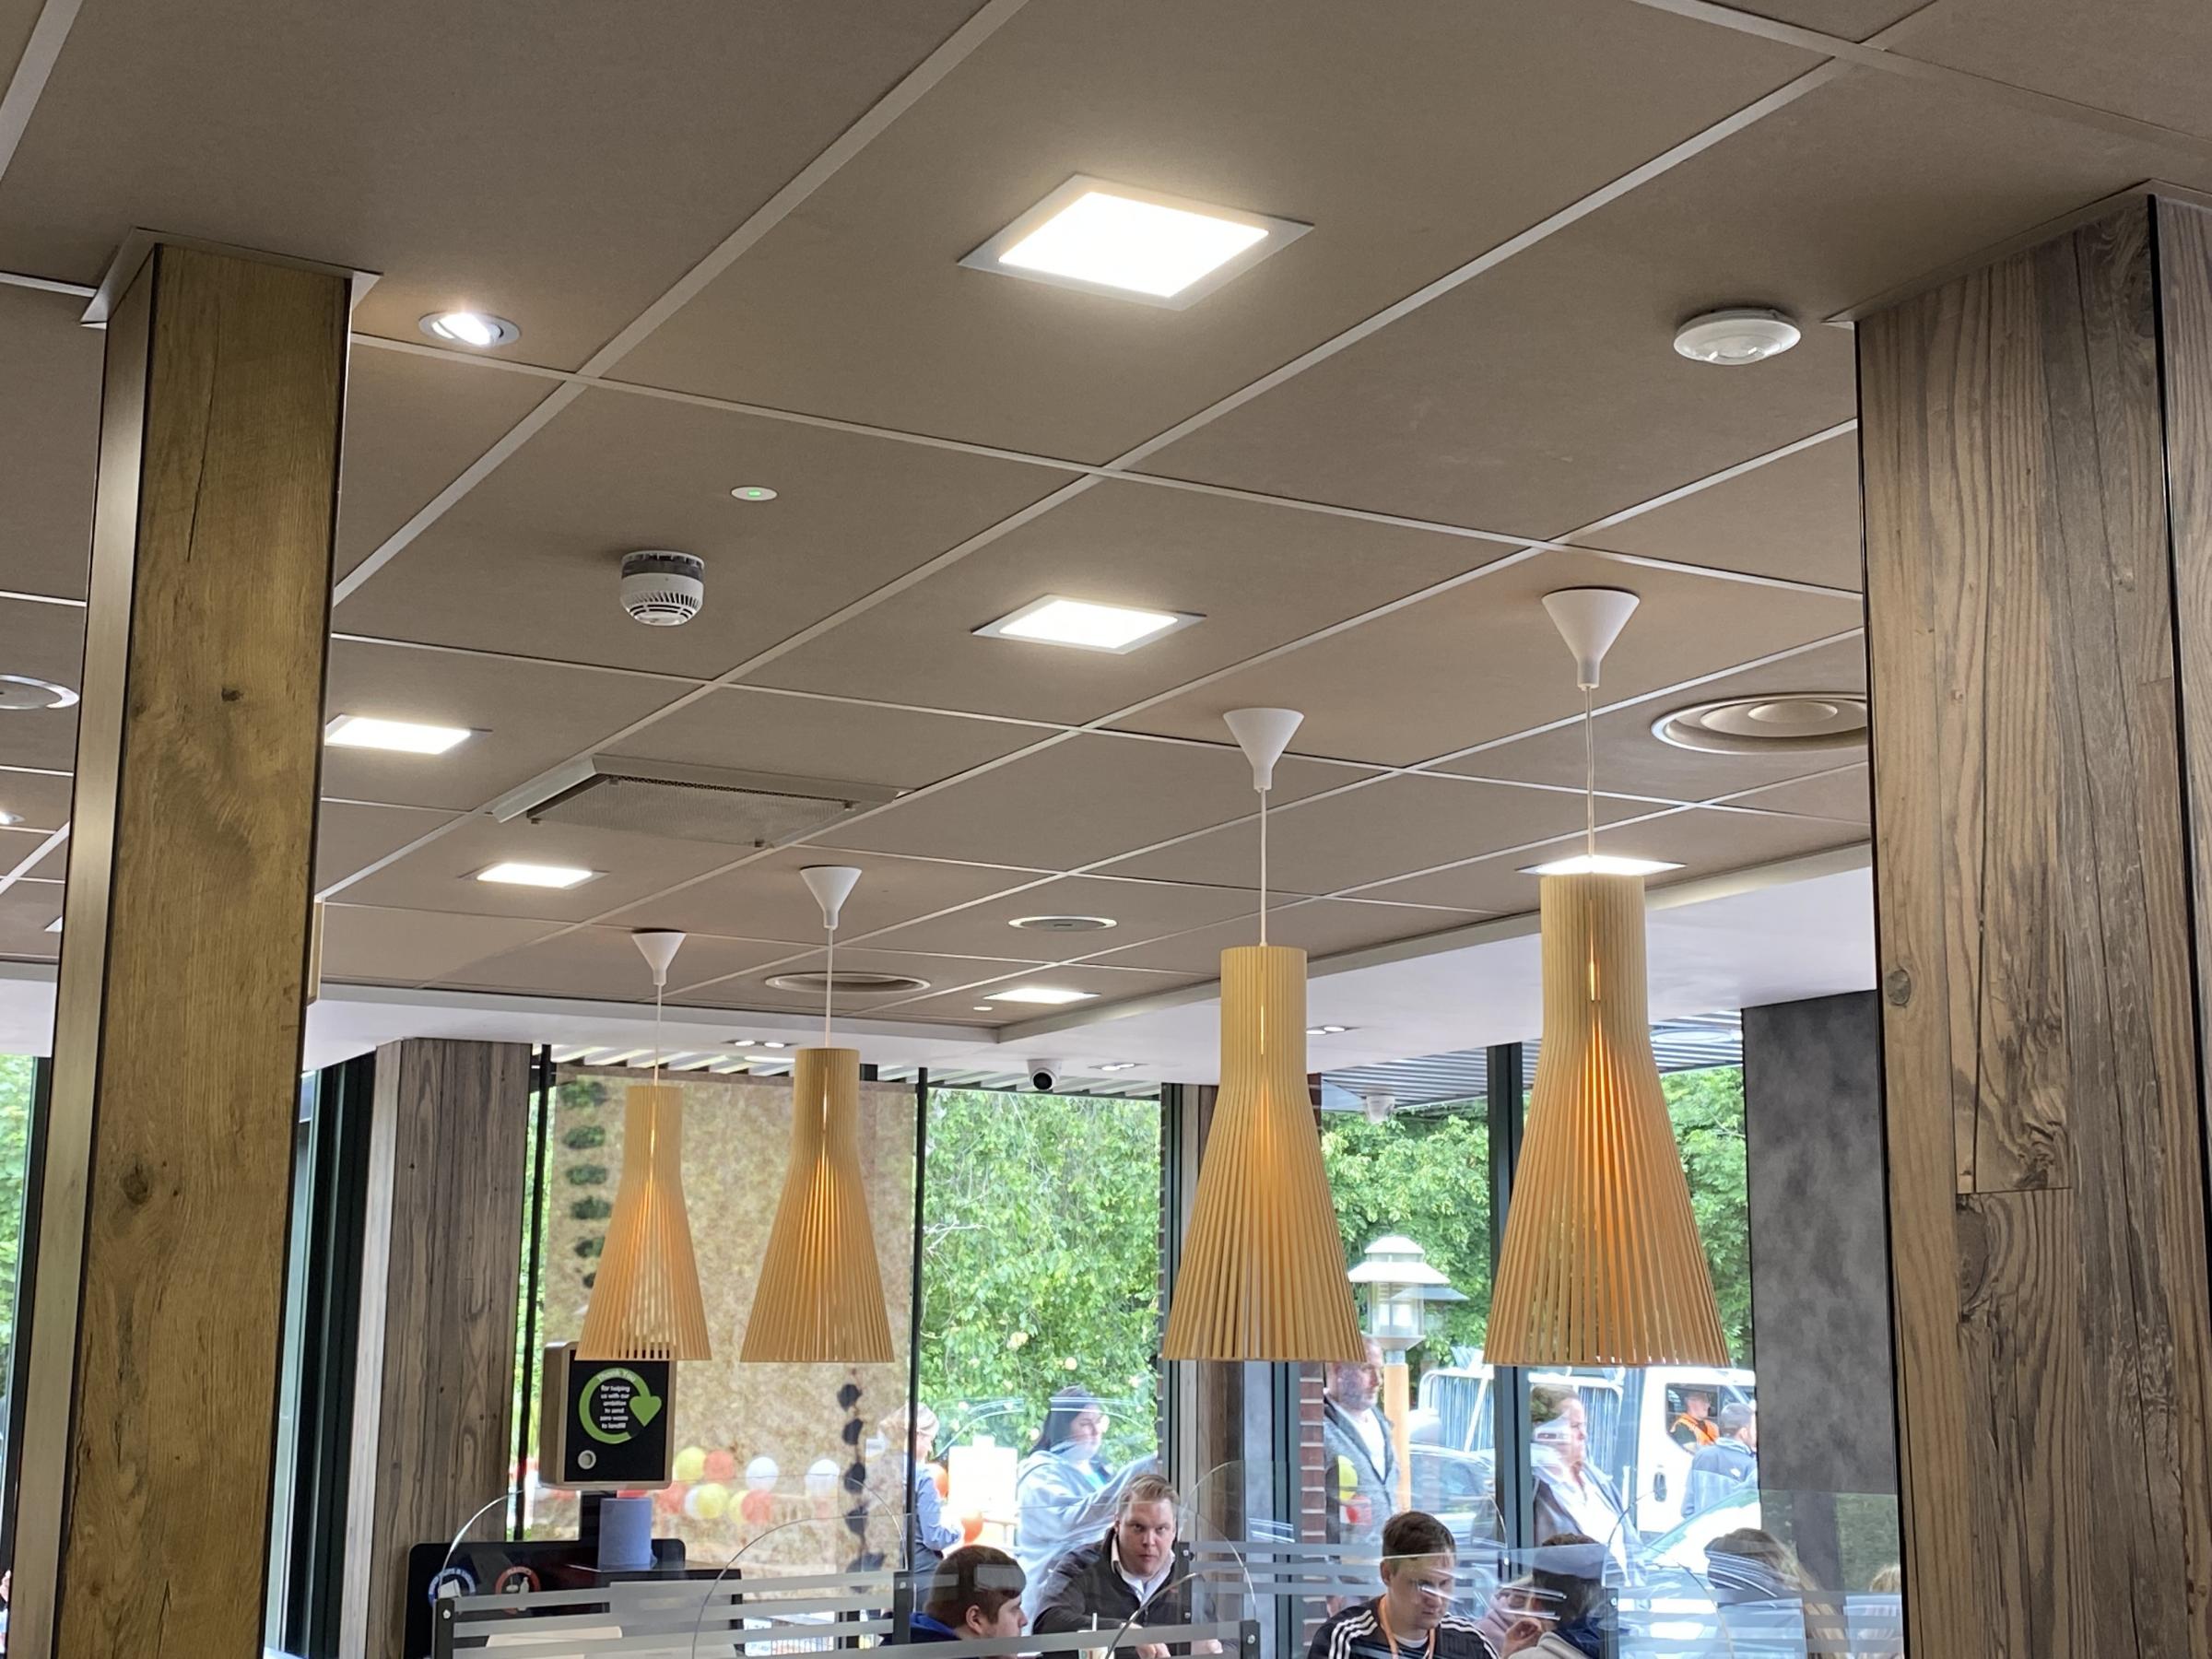 There is new lighting in the restaurant as part of the redesign 